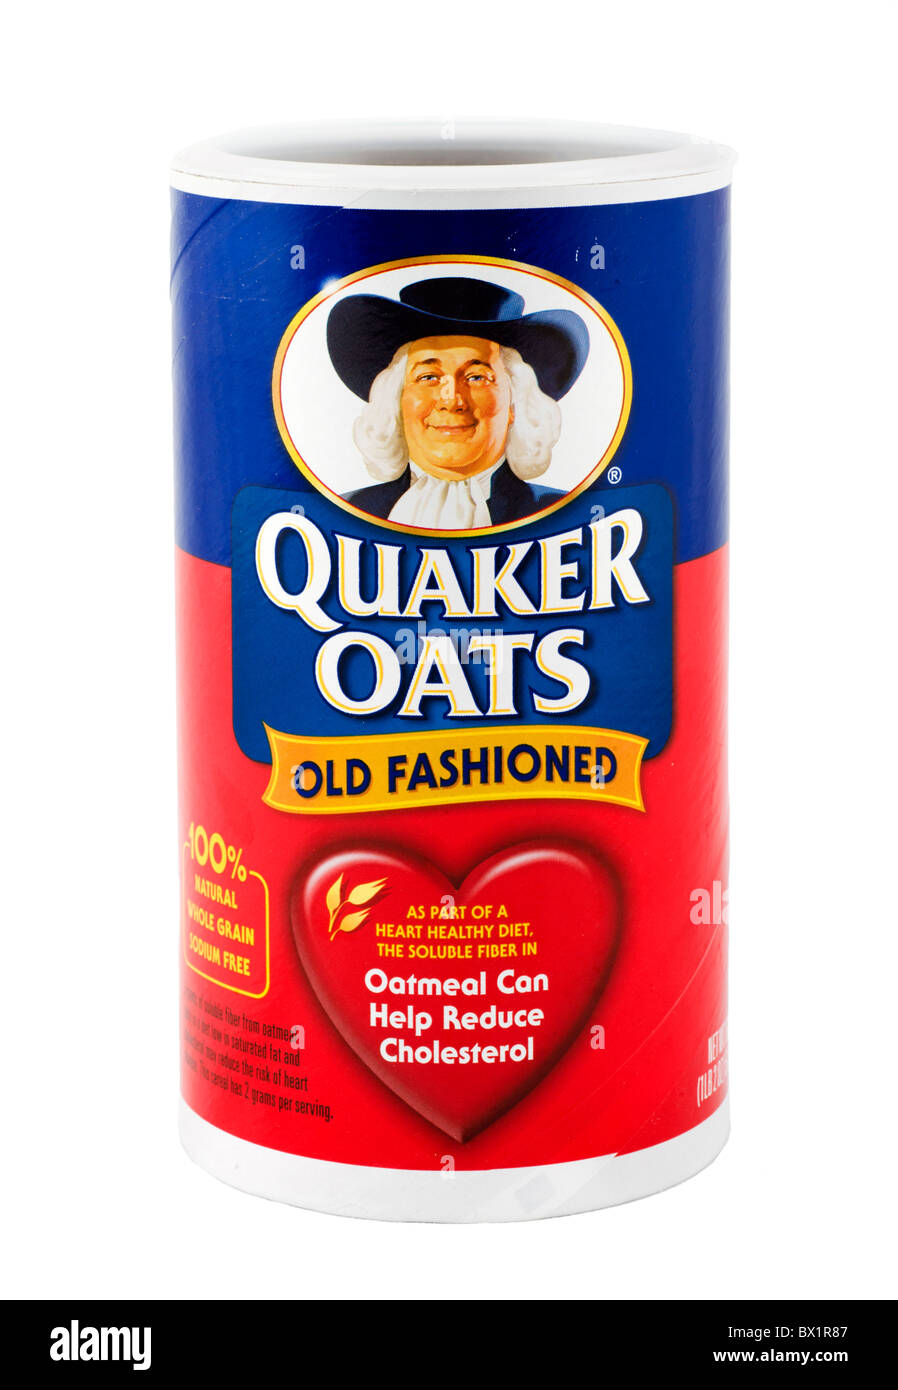 Old Fashioned Quaker Oats Oatmeal Usa Stock Photo Royalty Free in Amazing Quaker Old Fashioned Oats – Perfect Image Reference